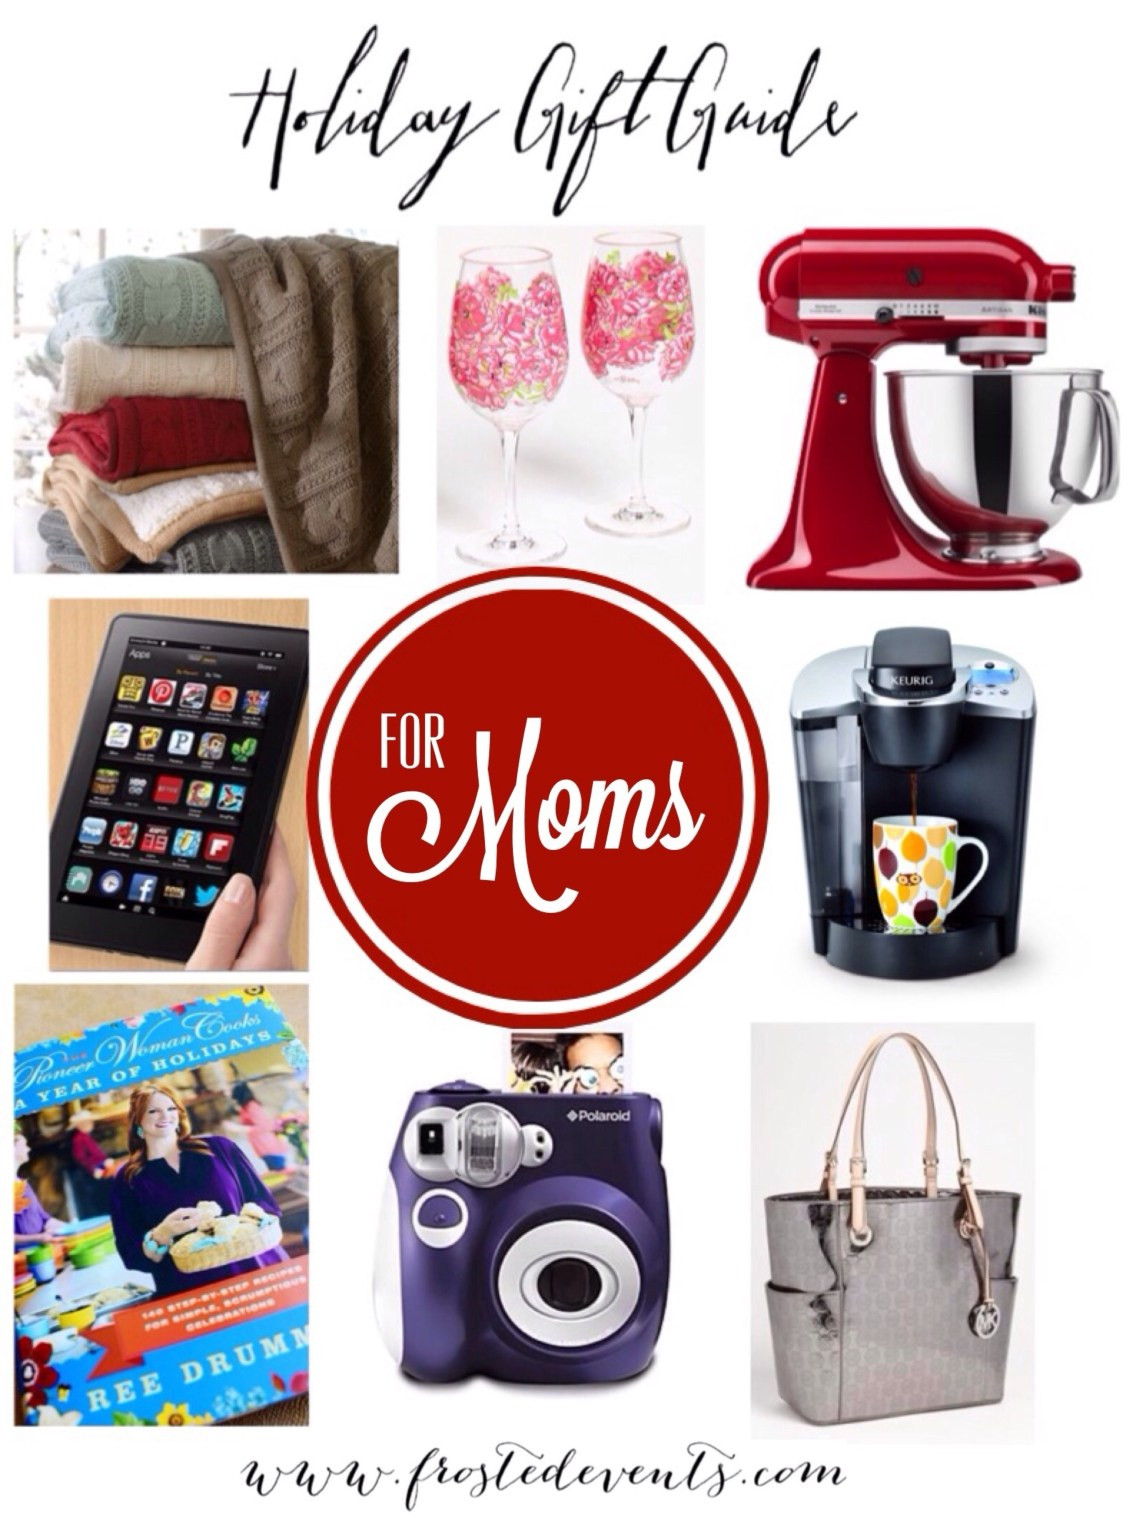 Christmas Gift Ideas For Moms
 Holiday Gifts for Moms